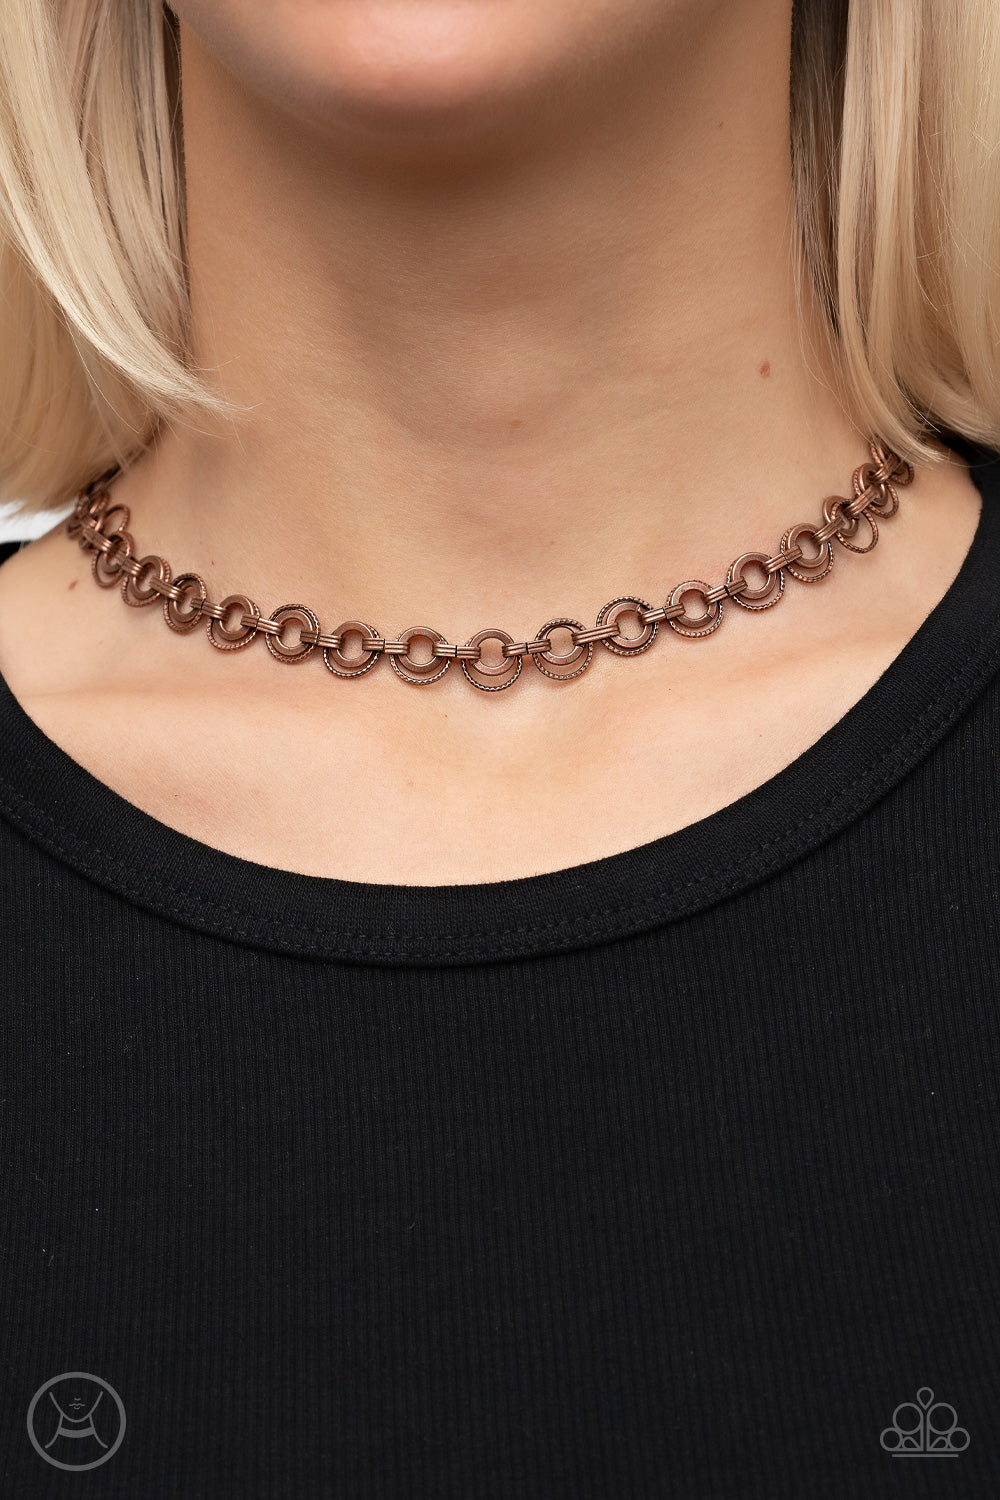 Paparazzi Paparazzi - Grit and Grind - Copper Choker Necklace Jewelry